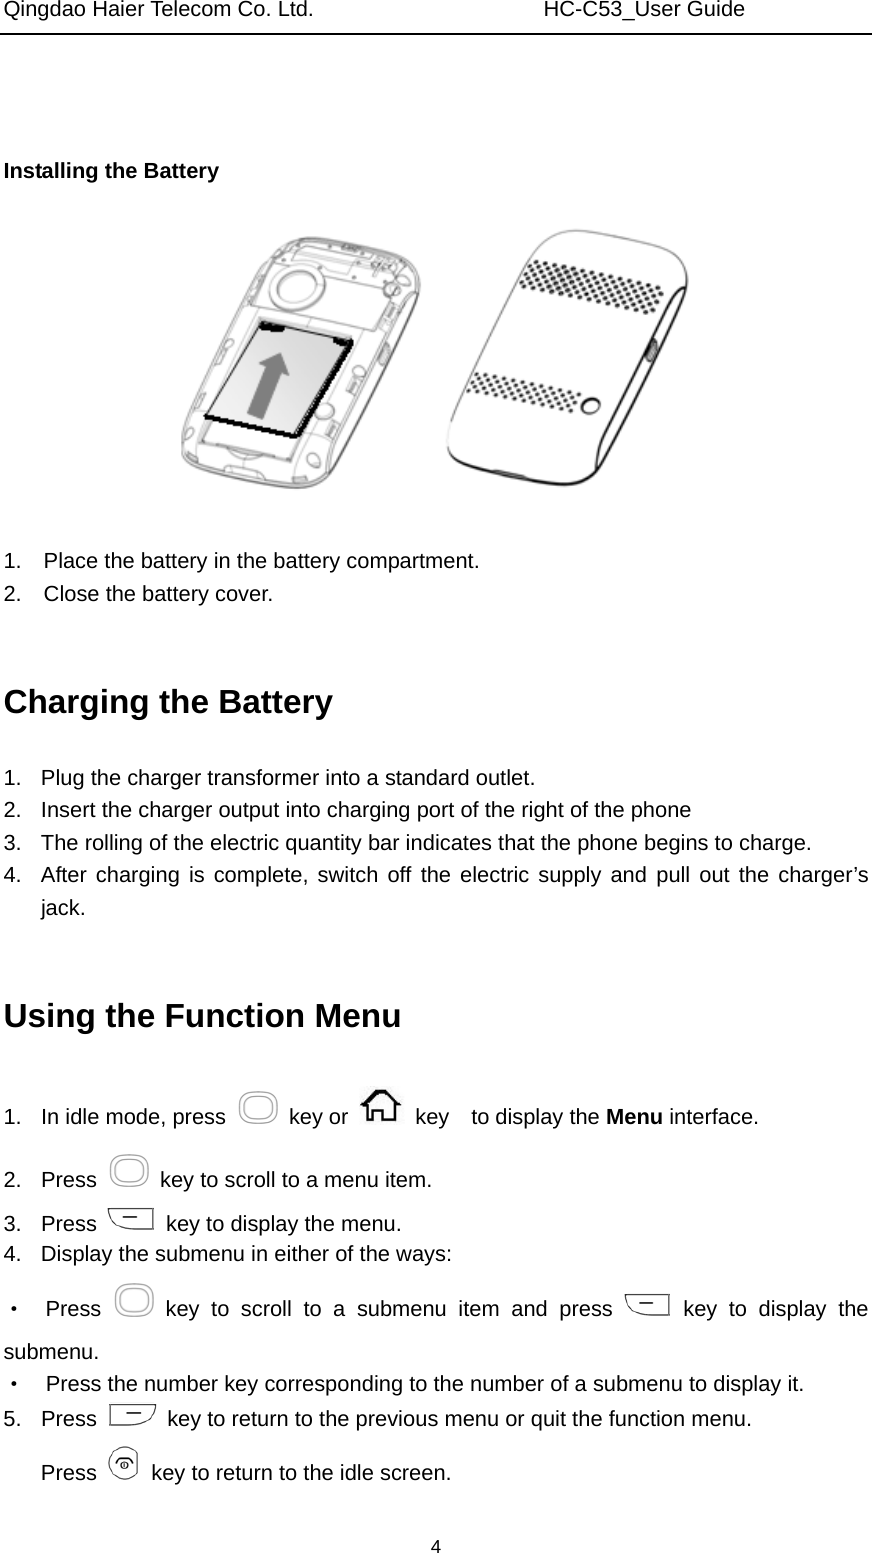 Qingdao Haier Telecom Co. Ltd.                     HC-C53_User Guide  4   Installing the Battery     1.    Place the battery in the battery compartment. 2.    Close the battery cover.  Charging the Battery 1.  Plug the charger transformer into a standard outlet. 2.  Insert the charger output into charging port of the right of the phone 3.  The rolling of the electric quantity bar indicates that the phone begins to charge. 4.  After charging is complete, switch off the electric supply and pull out the charger’s jack.  Using the Function Menu 1.  In idle mode, press   key or   key  to display the Menu interface. 2. Press    key to scroll to a menu item. 3. Press    key to display the menu. 4.  Display the submenu in either of the ways: ·  Press   key to scroll to a submenu item and press   key to display the submenu. ·    Press the number key corresponding to the number of a submenu to display it. 5. Press    key to return to the previous menu or quit the function menu. Press    key to return to the idle screen. 